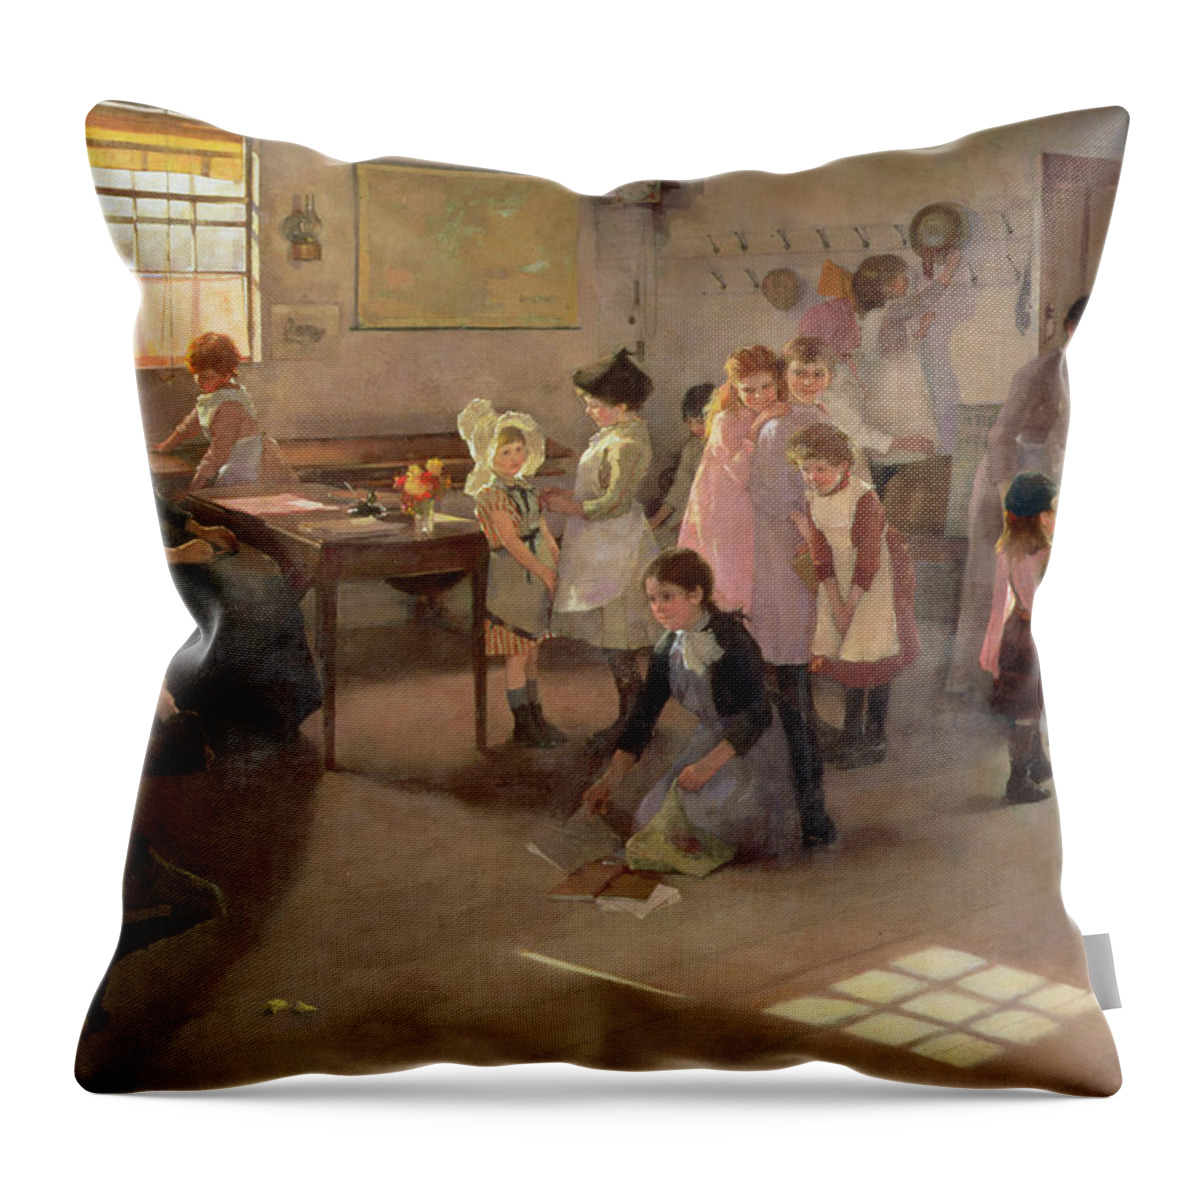 School Is Out Throw Pillow featuring the painting School is Out by Elizabeth Adela Stanhope Forbes